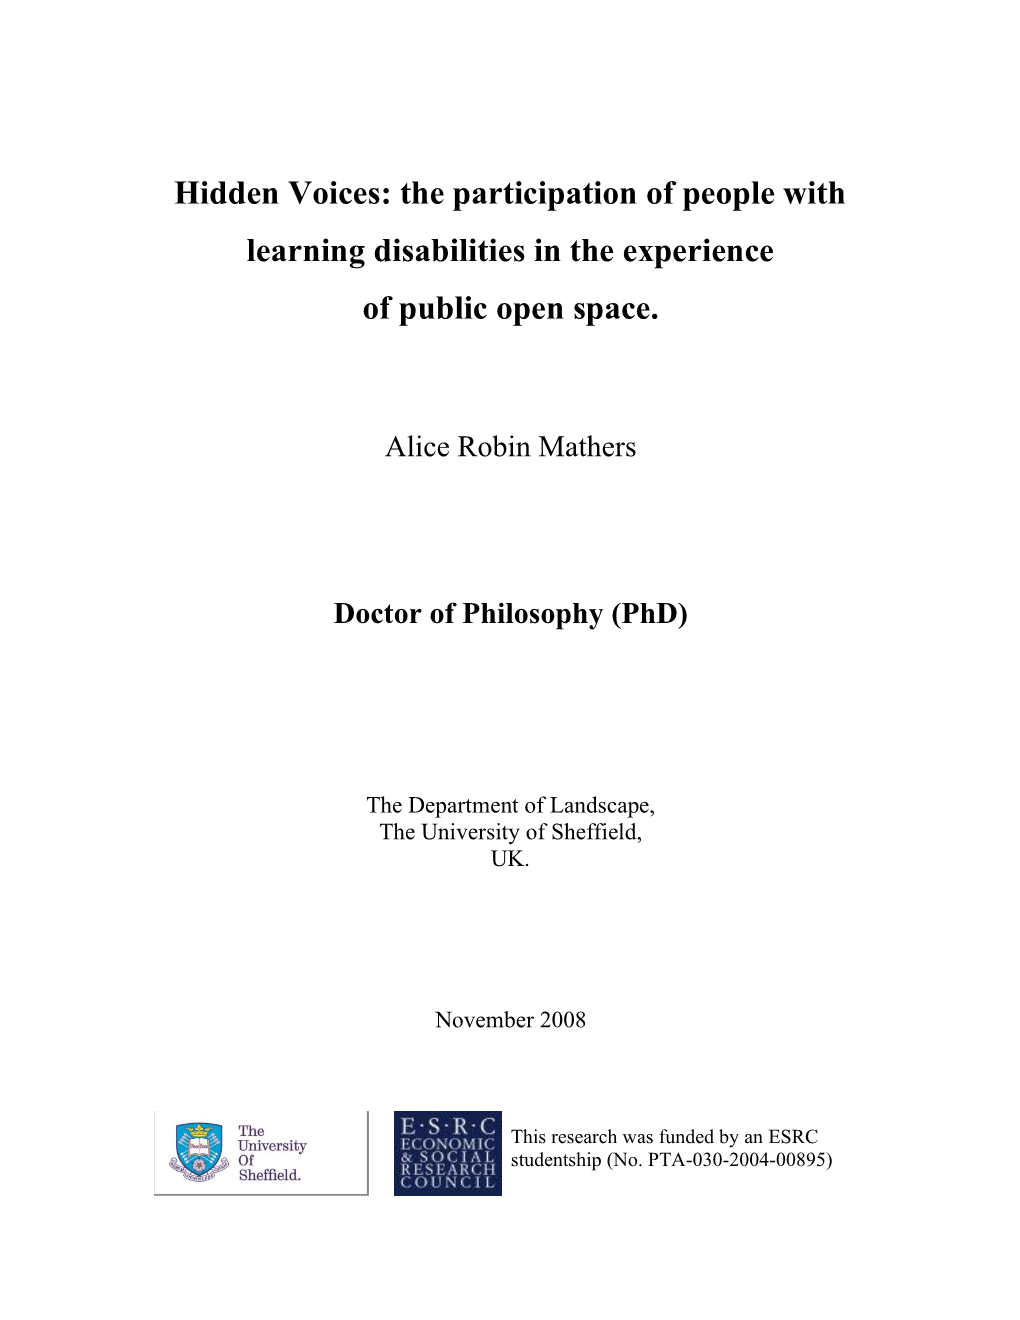 Hidden Voices: the Participation of People with Learning Disabilities in the Experience of Public Open Space